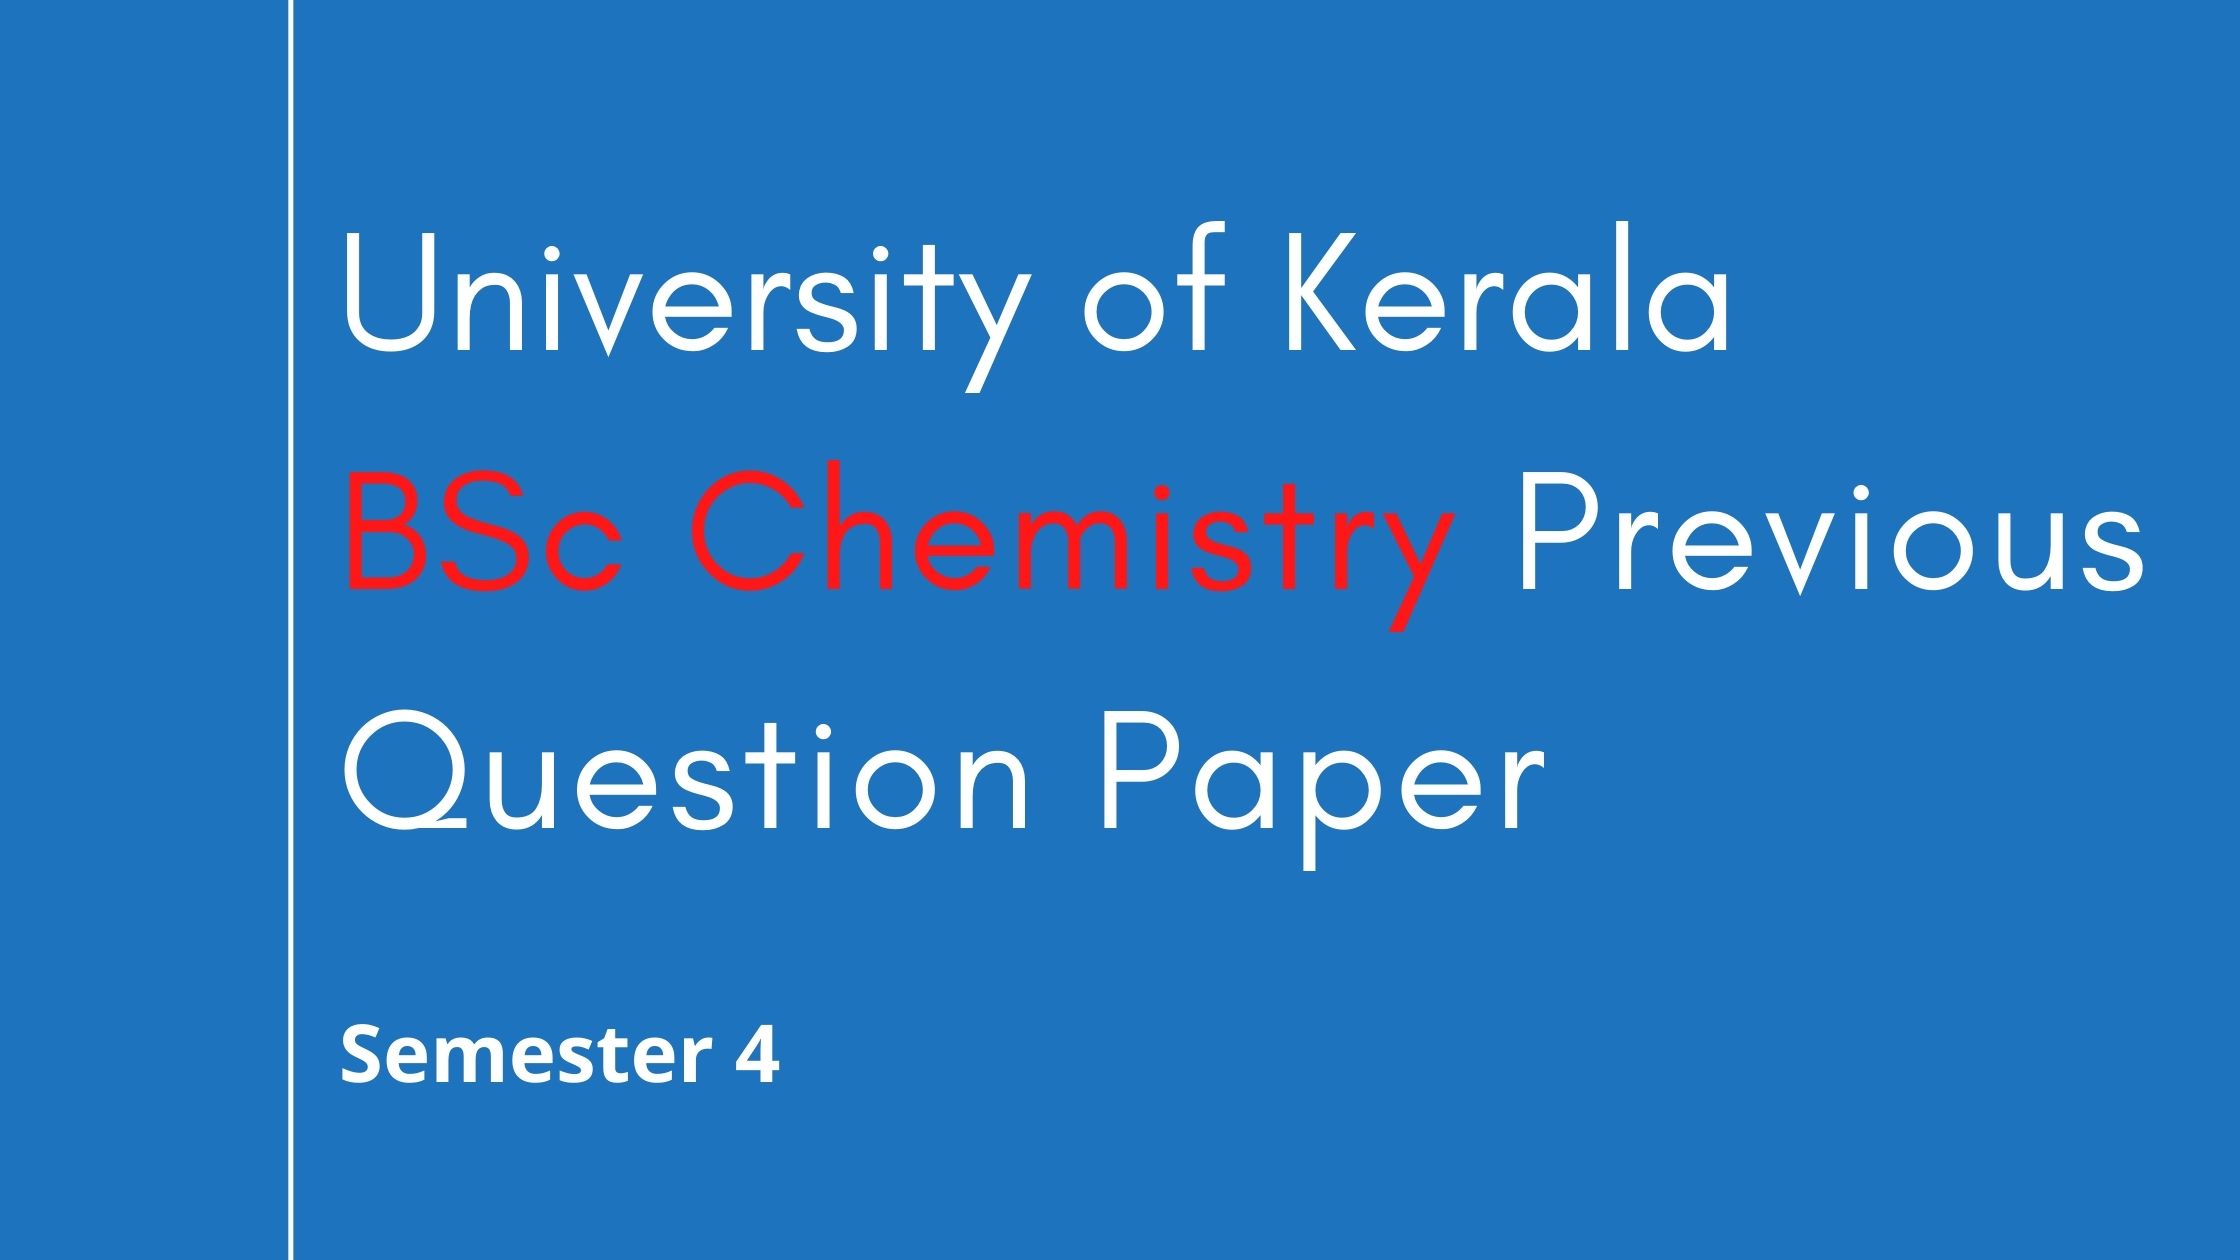 BSc Chemistry Fourth Semester Previous Year Question Papers of Kerala University